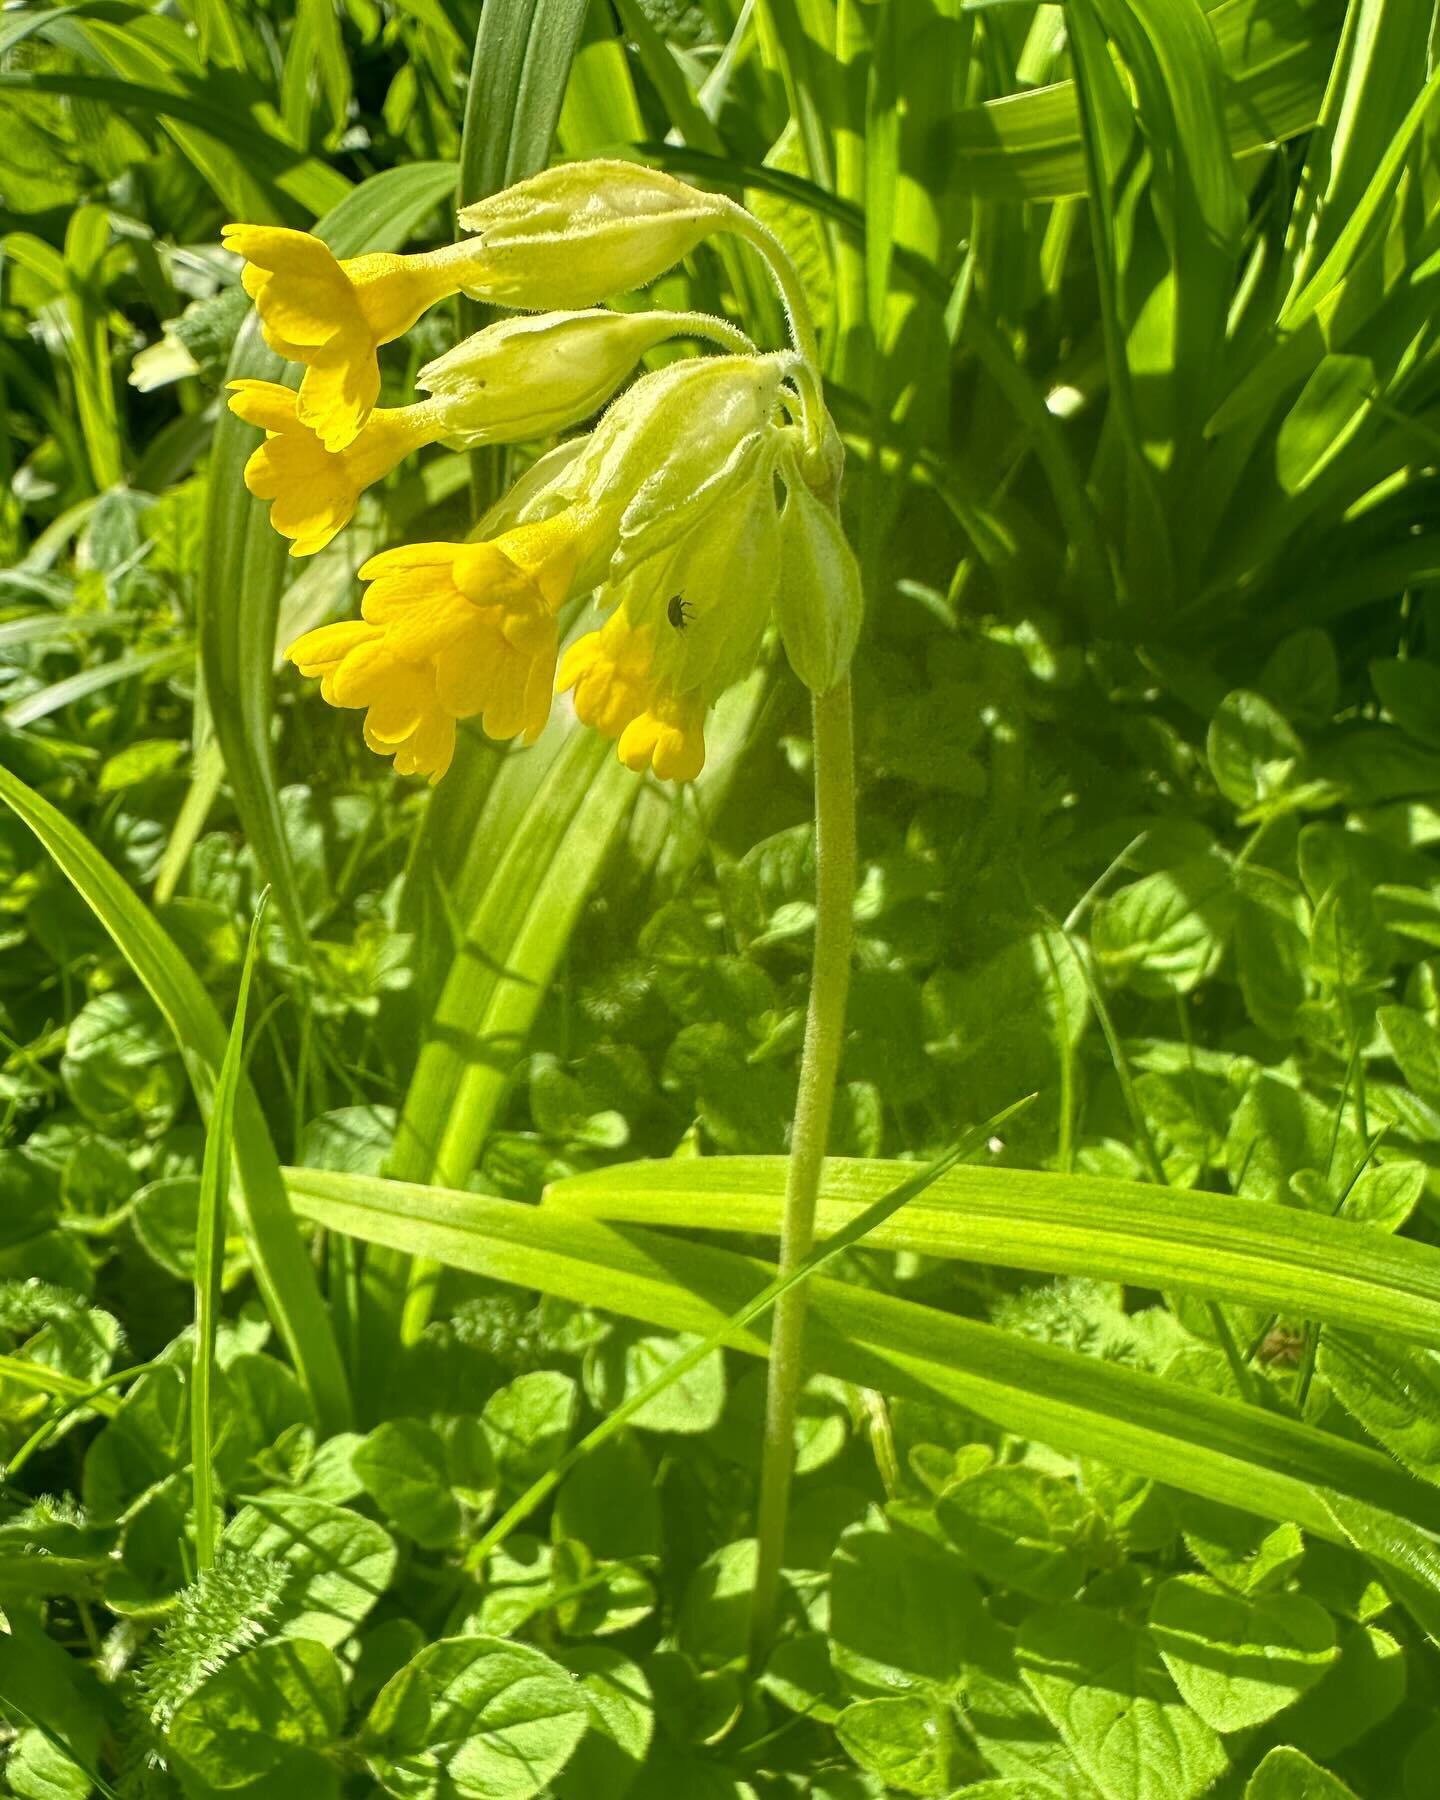 The ups and downs of wildlife gardening. There are cowslips (Primula veris) appearing all over Chalkhill (1st three photos) but the Wild thyme (Thymus polytrichus) I grew from seed 2 years ago and carpeted areas of the pollinator patch with flowers a